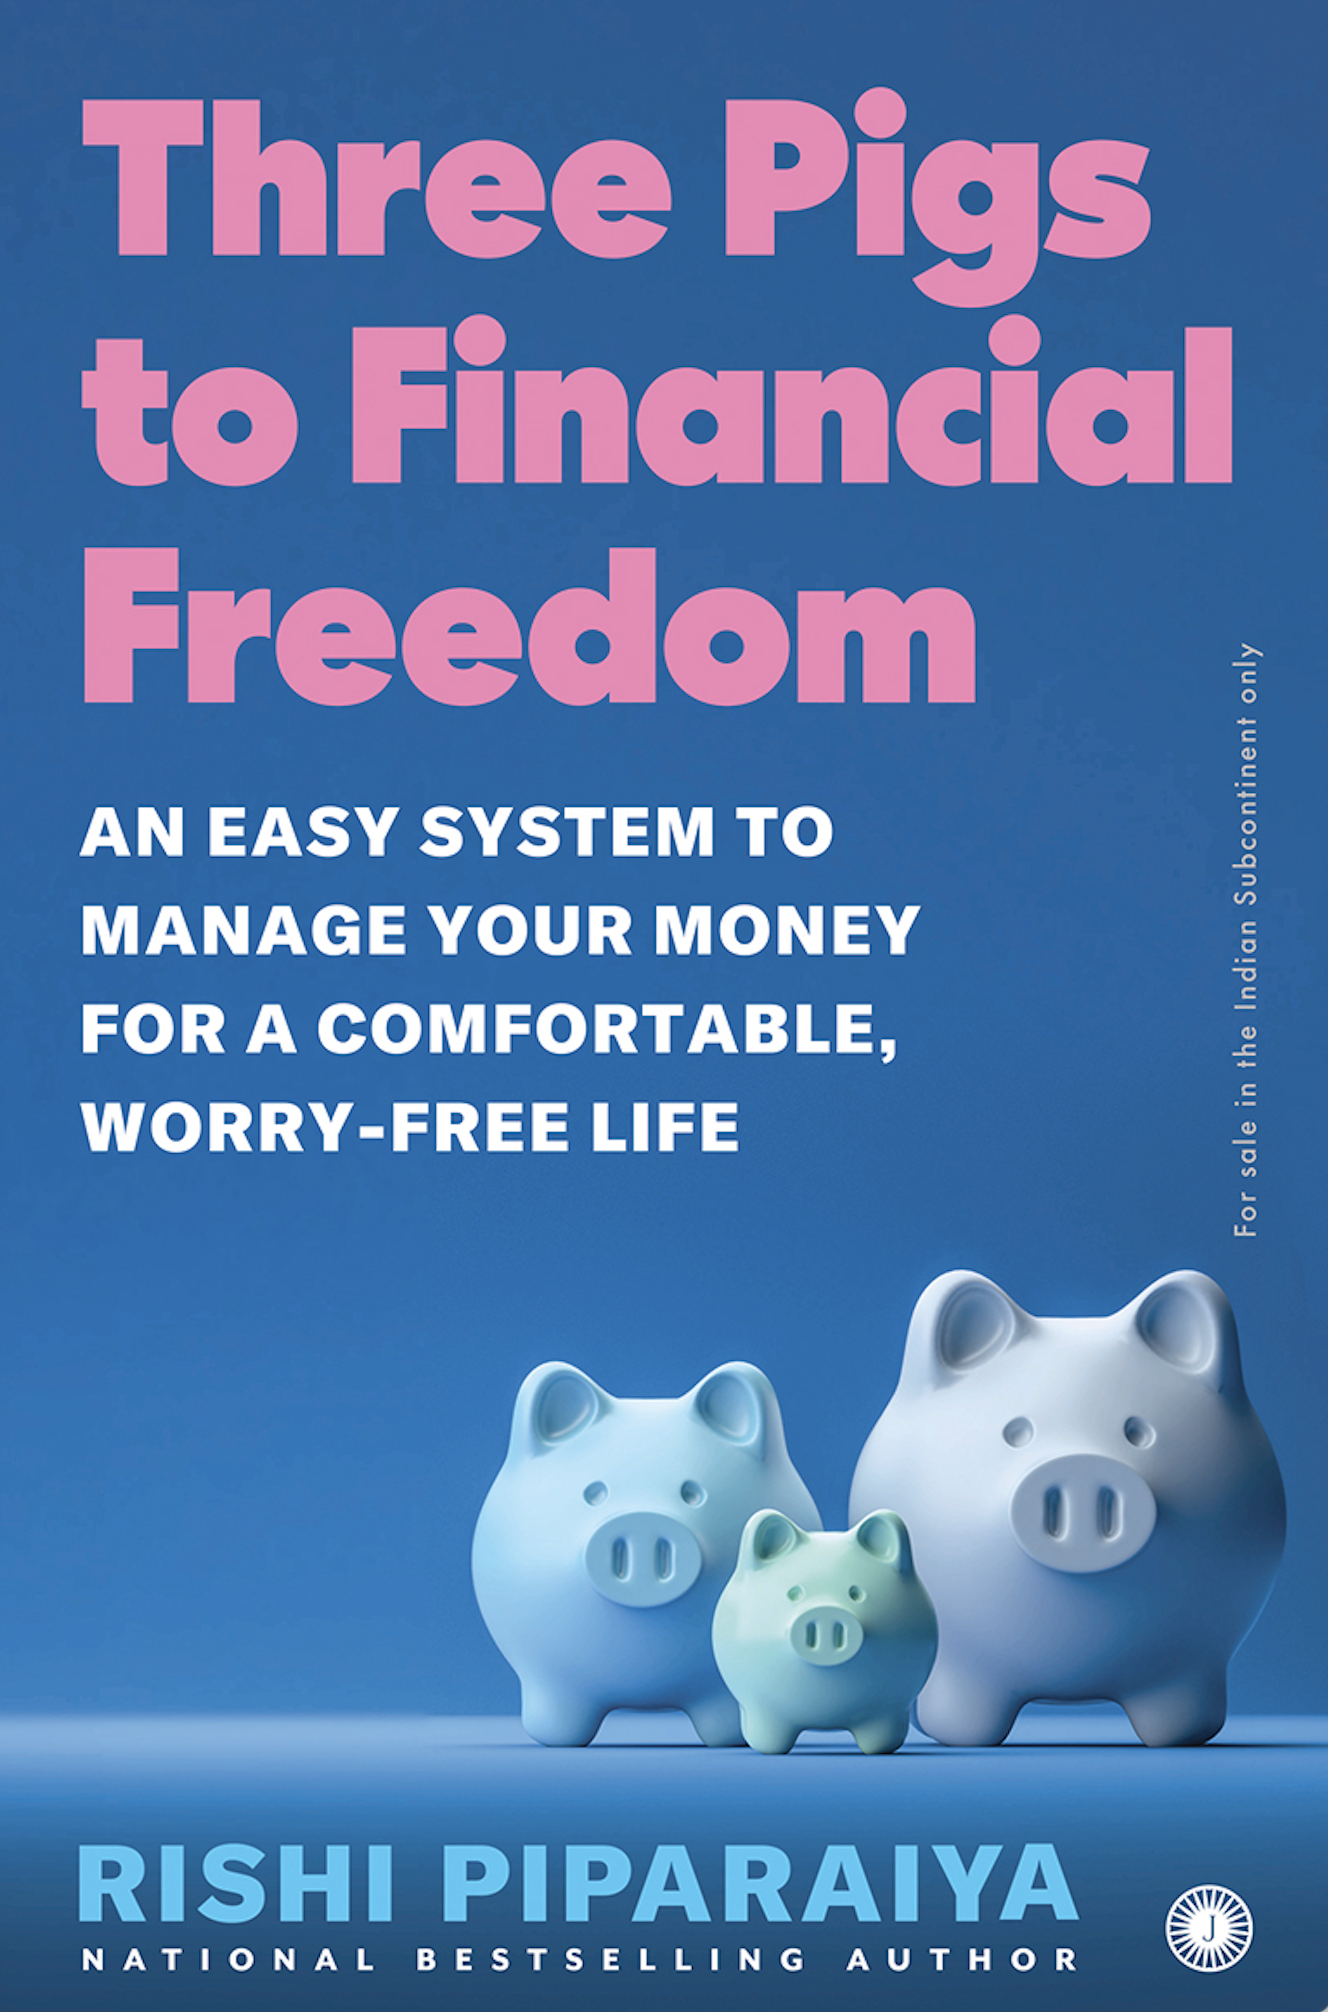 Three Pigs to Financial Freedom